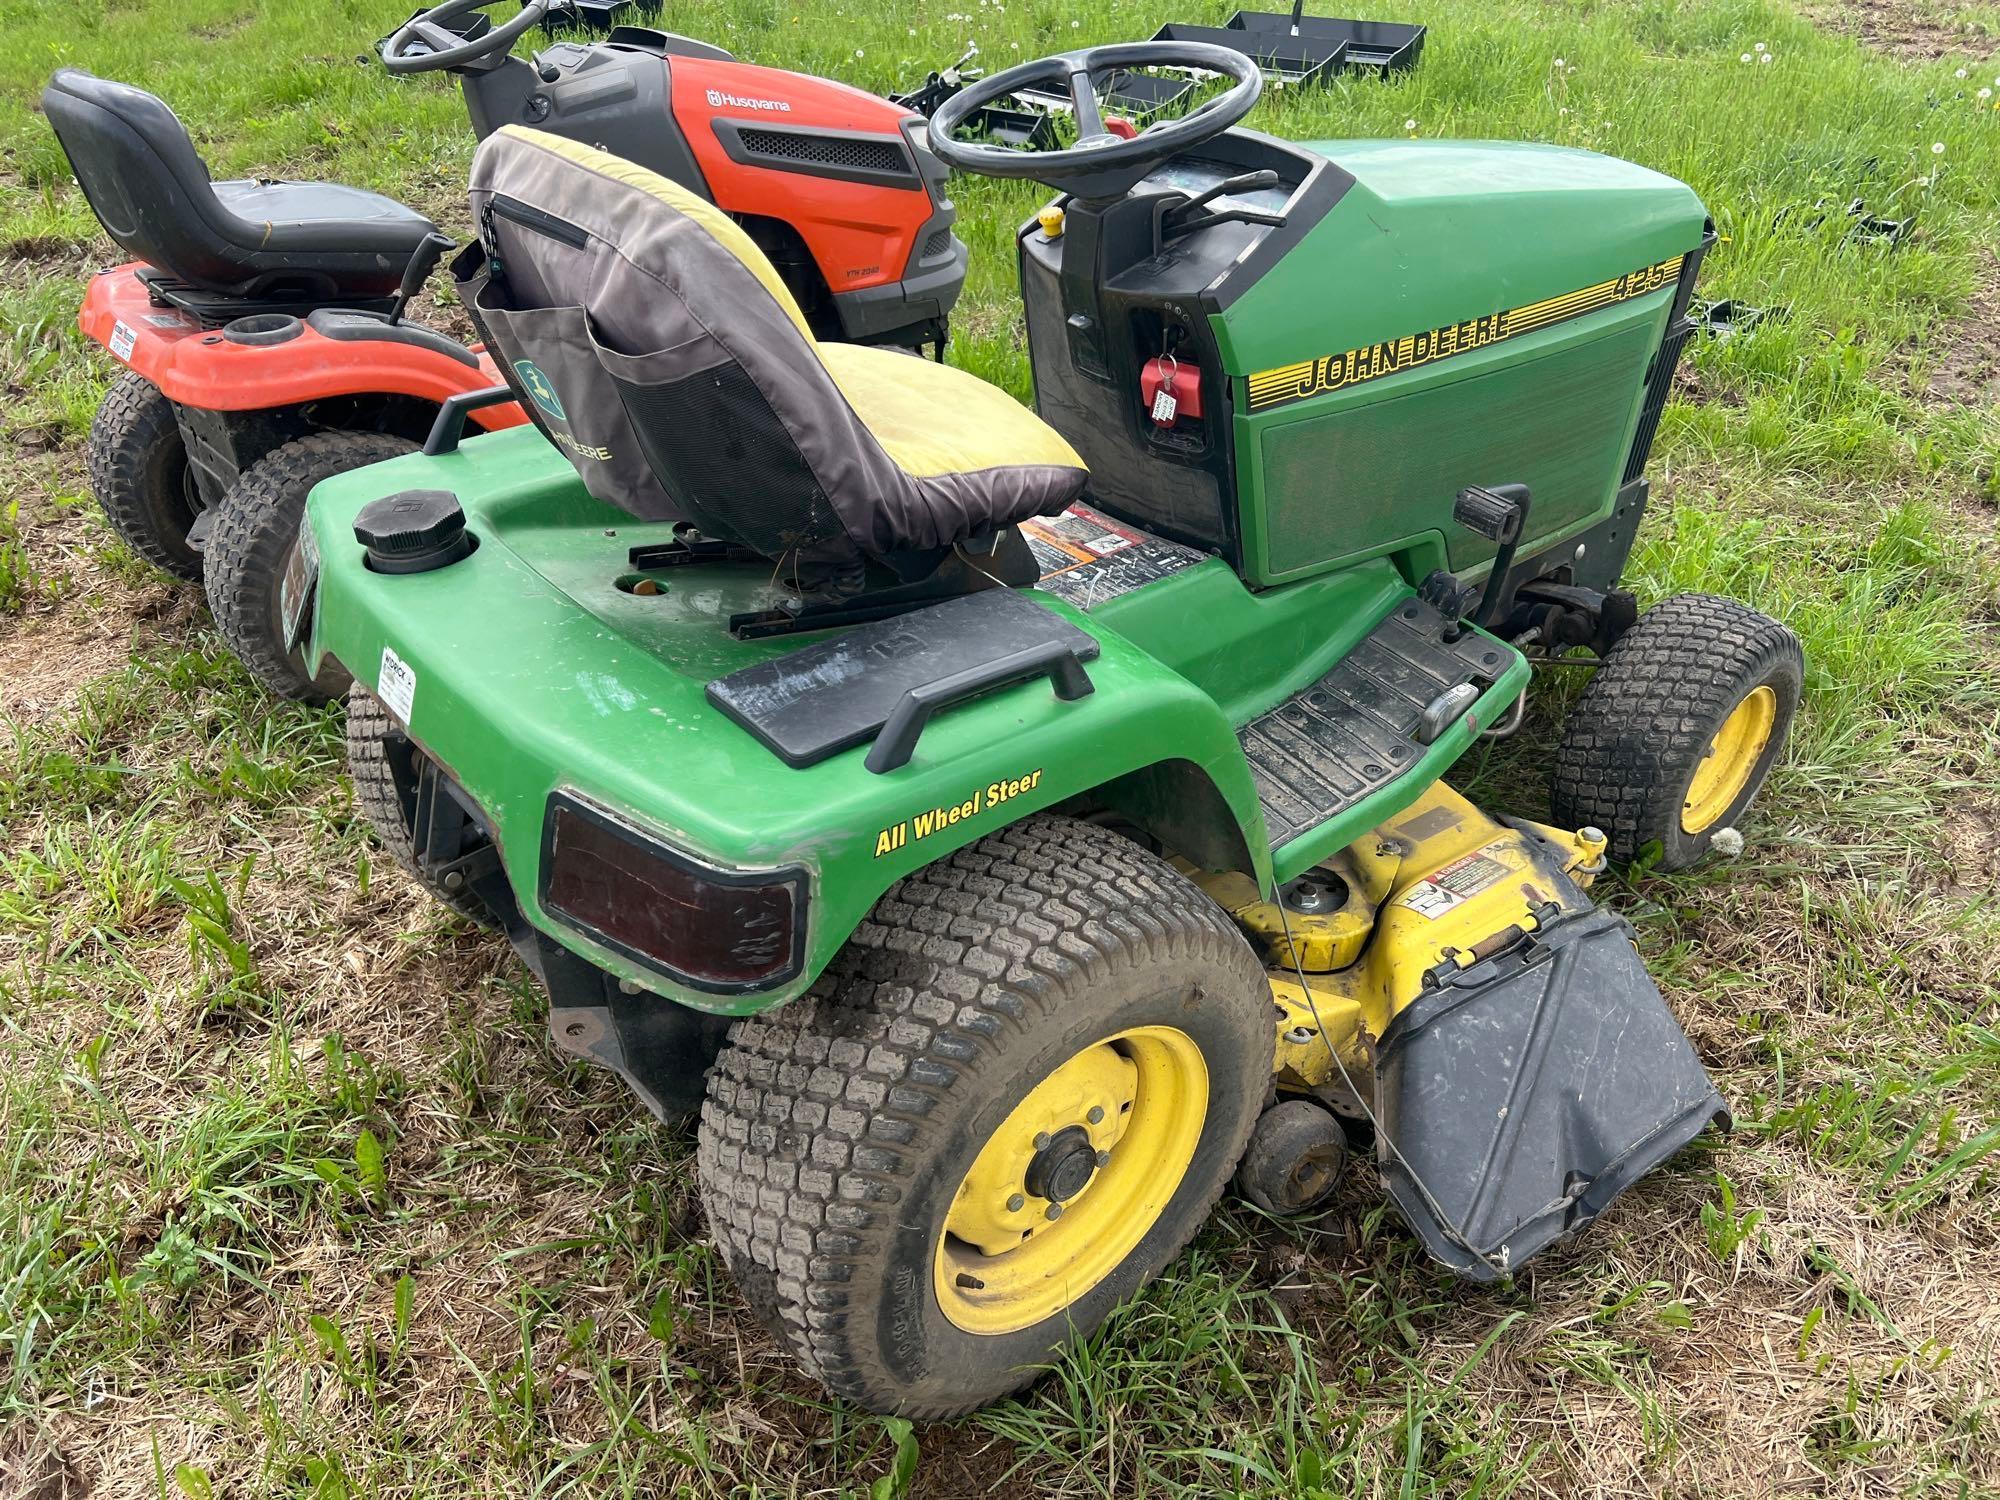 JOHN DEERE 425 LAWN & GARDEN TRACTOR powered by gas engine, equipped with 48in. Cutting deck.